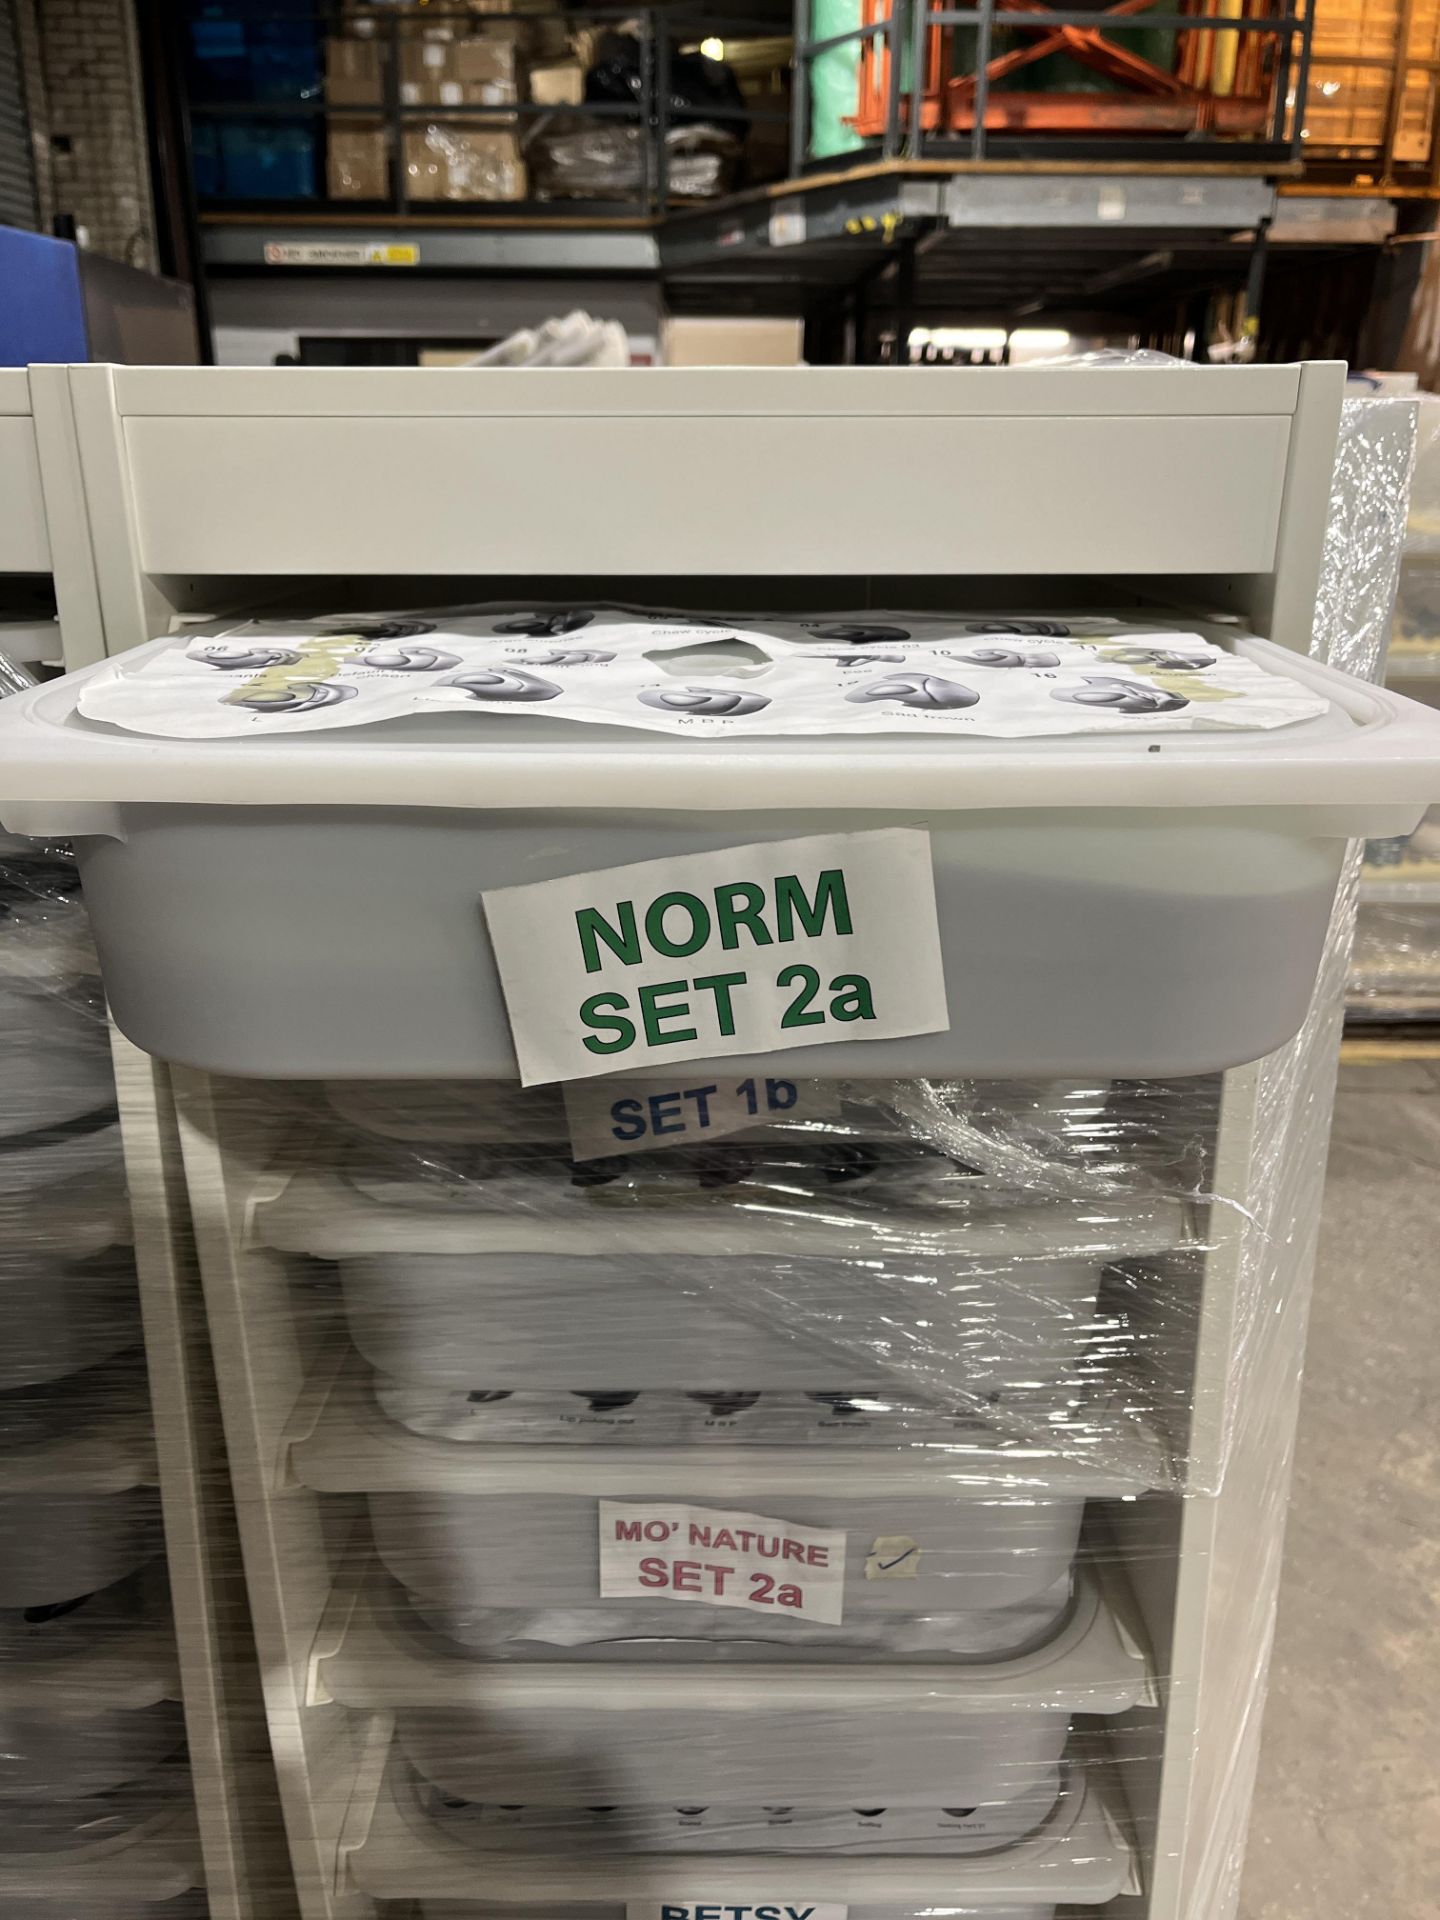 3 x Pallets of Puppets, Costumes and Accessories for TV Animation 'Norman Picklestripes' - Image 16 of 17